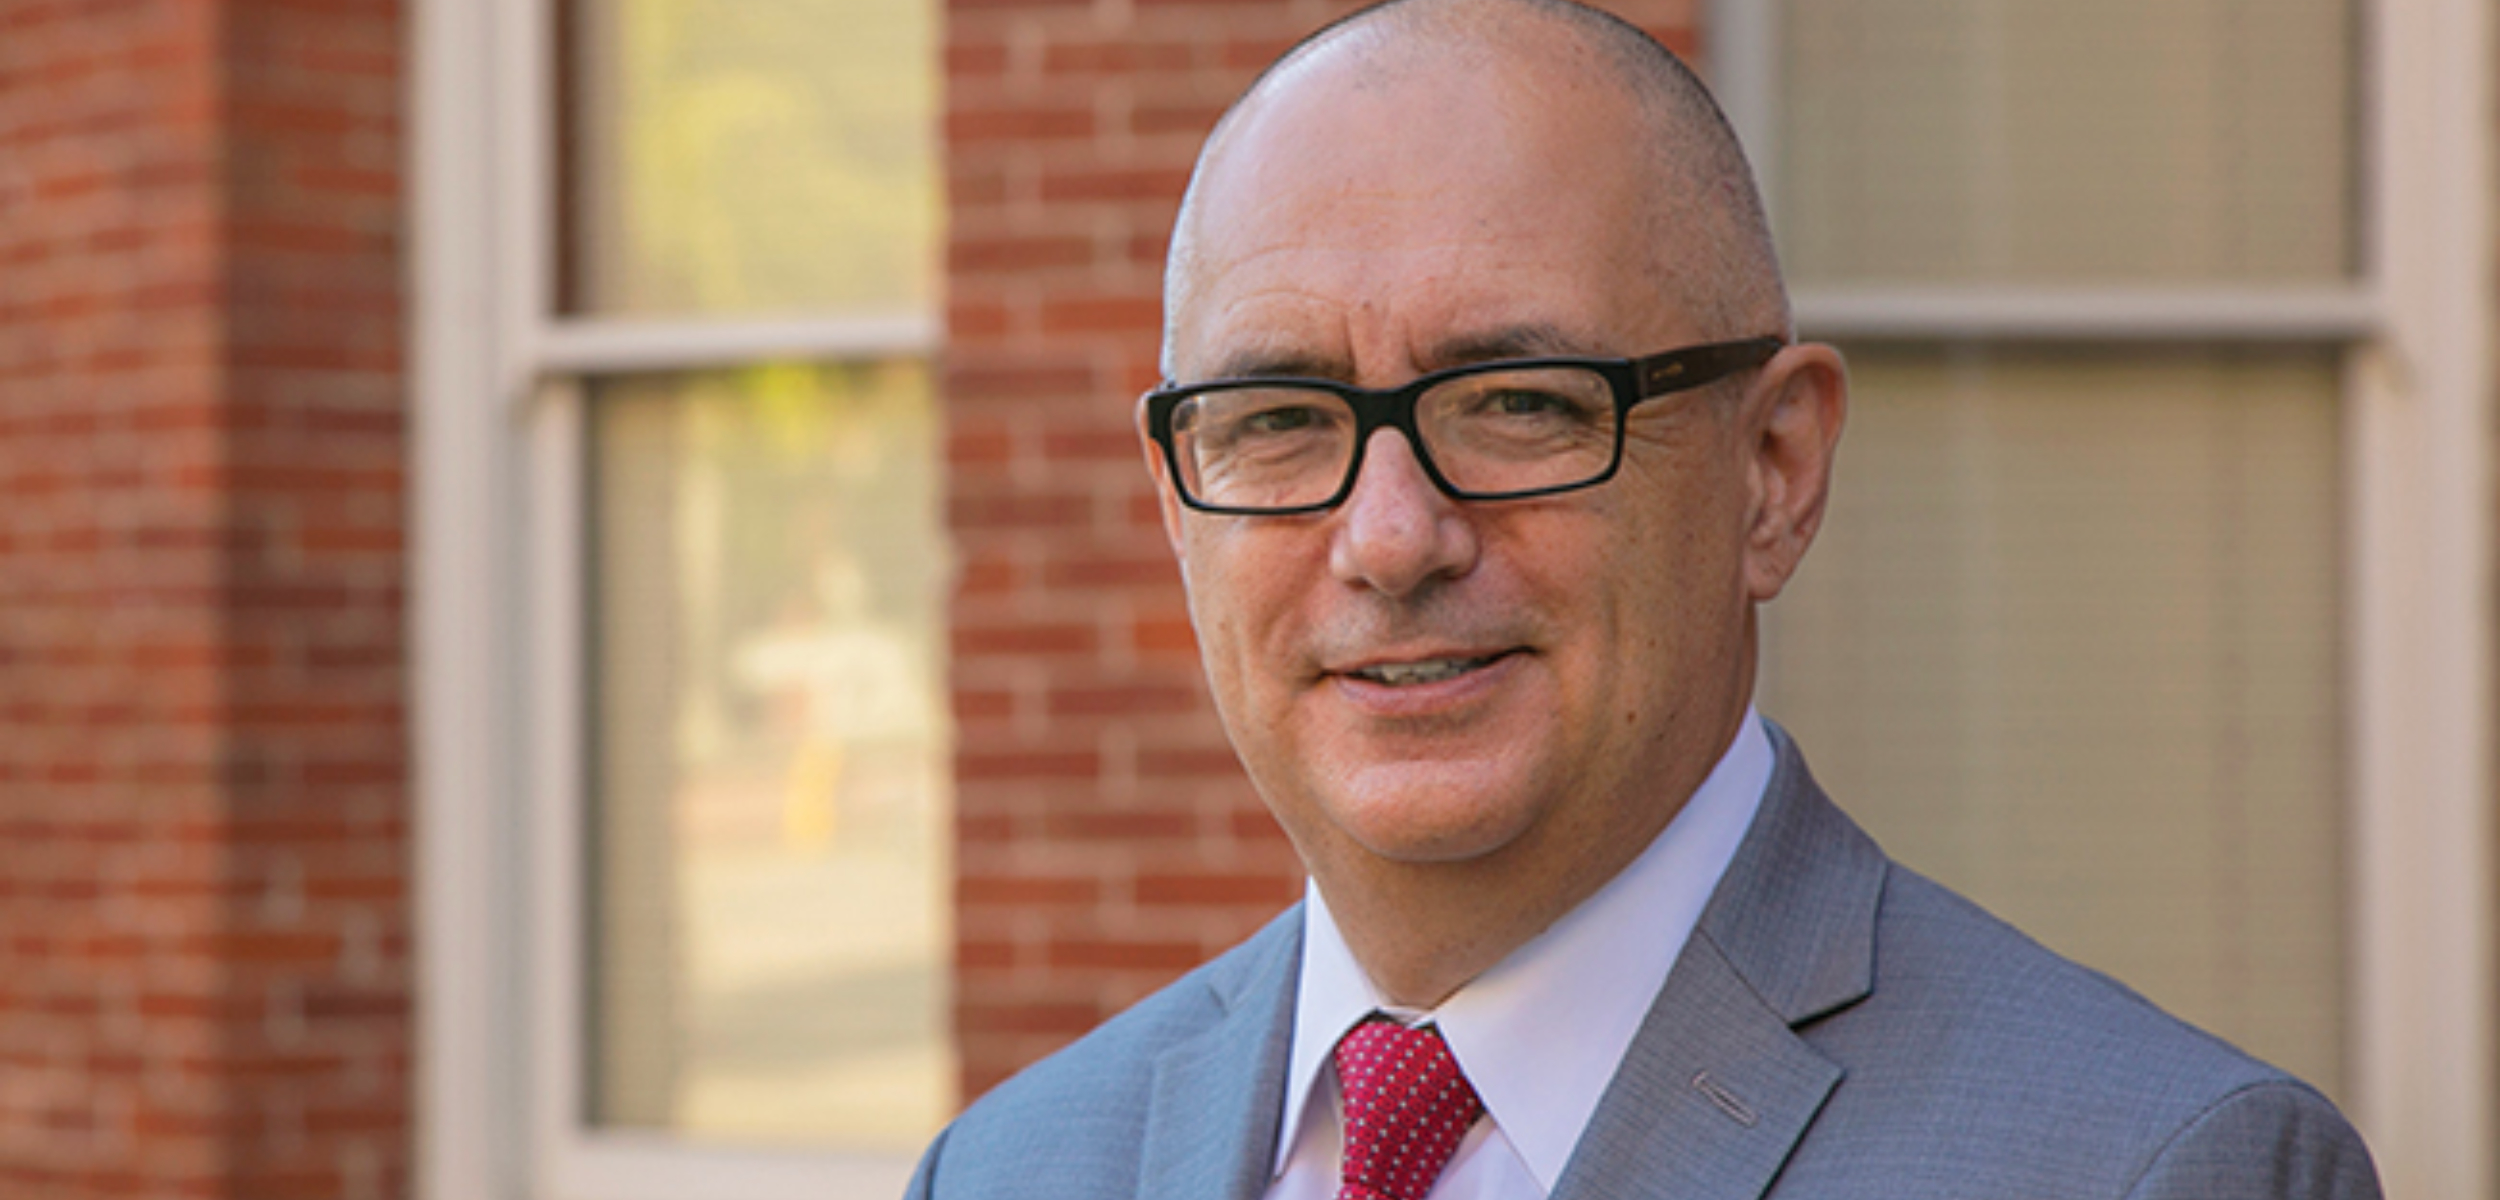 VP of University Advancement Brings Decades of Experience